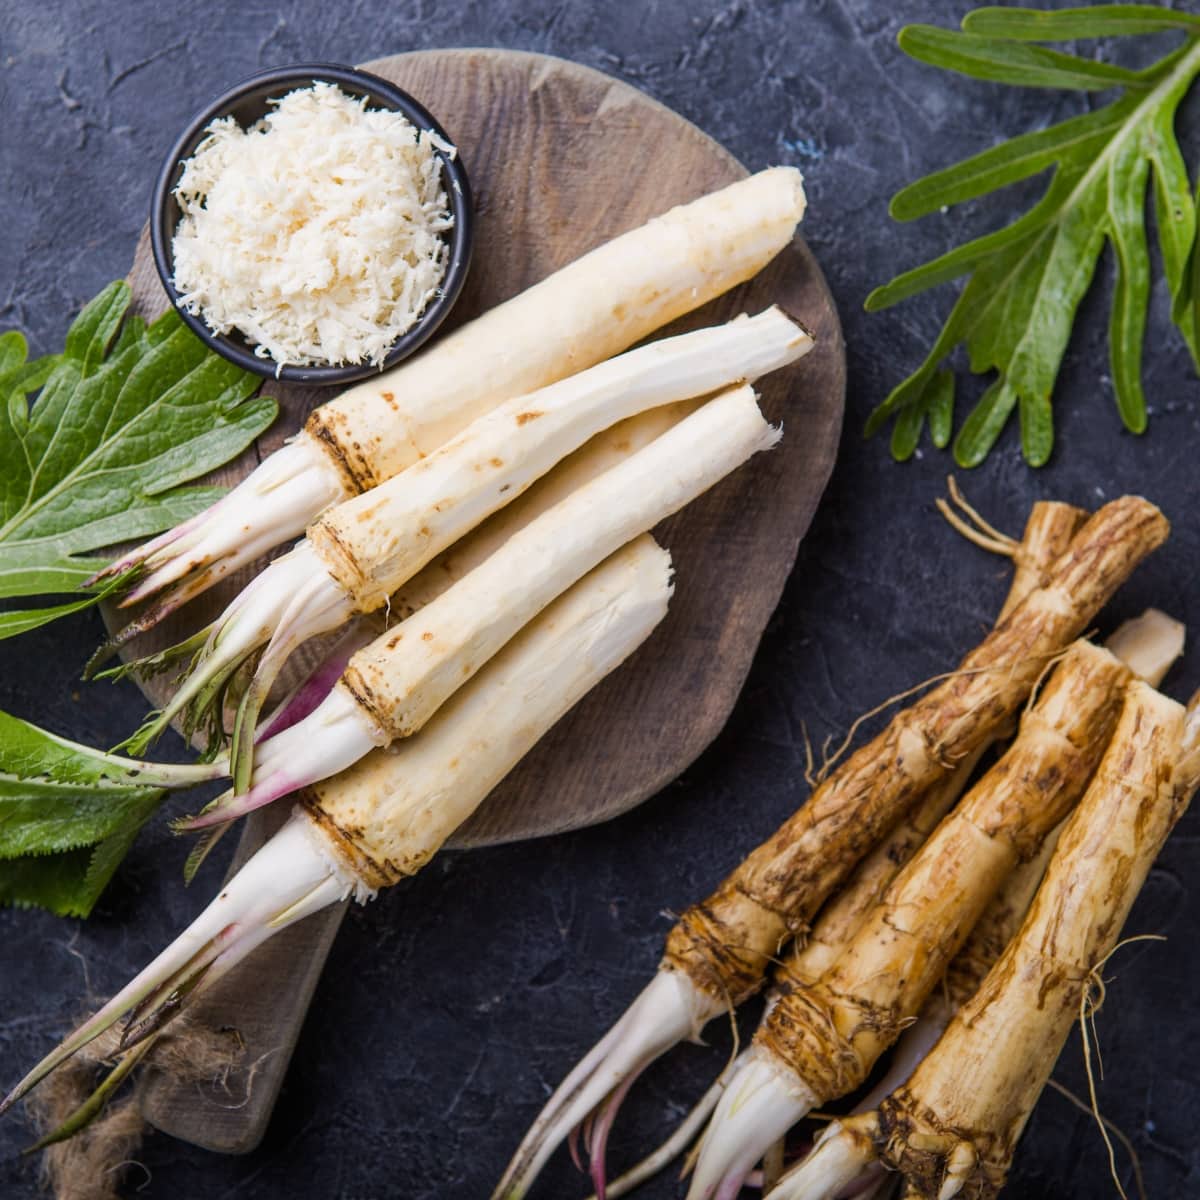 Fresh Horseradish Roots- Some Peeled Roots on a Cutting Board with a Bowl of Grated Horseradish and More Raw Horseradish to the Side